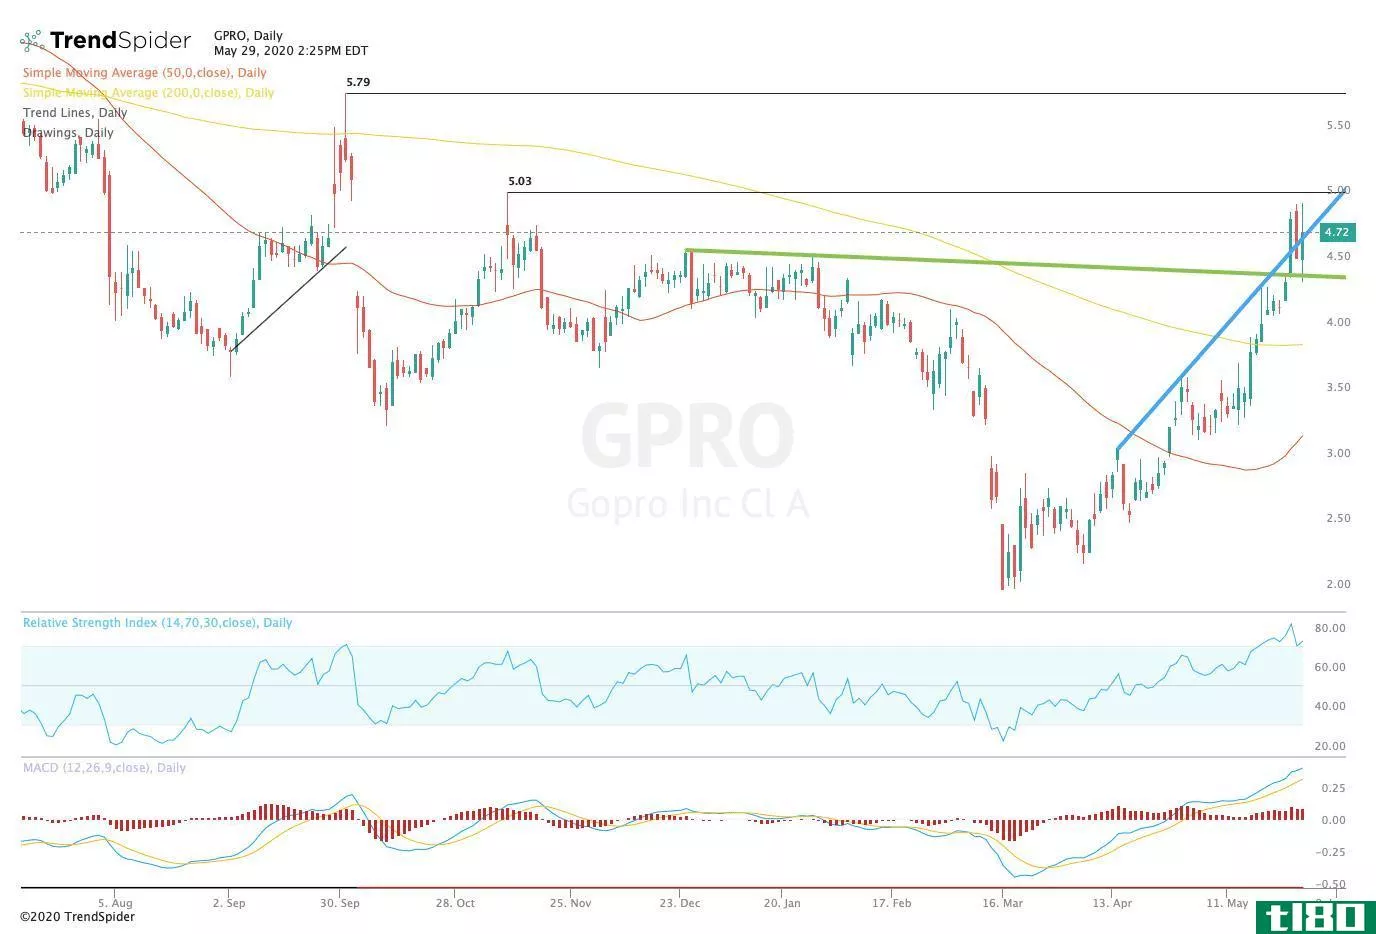 Chart showing the share price performance of GoPro, Inc. (GPRO)